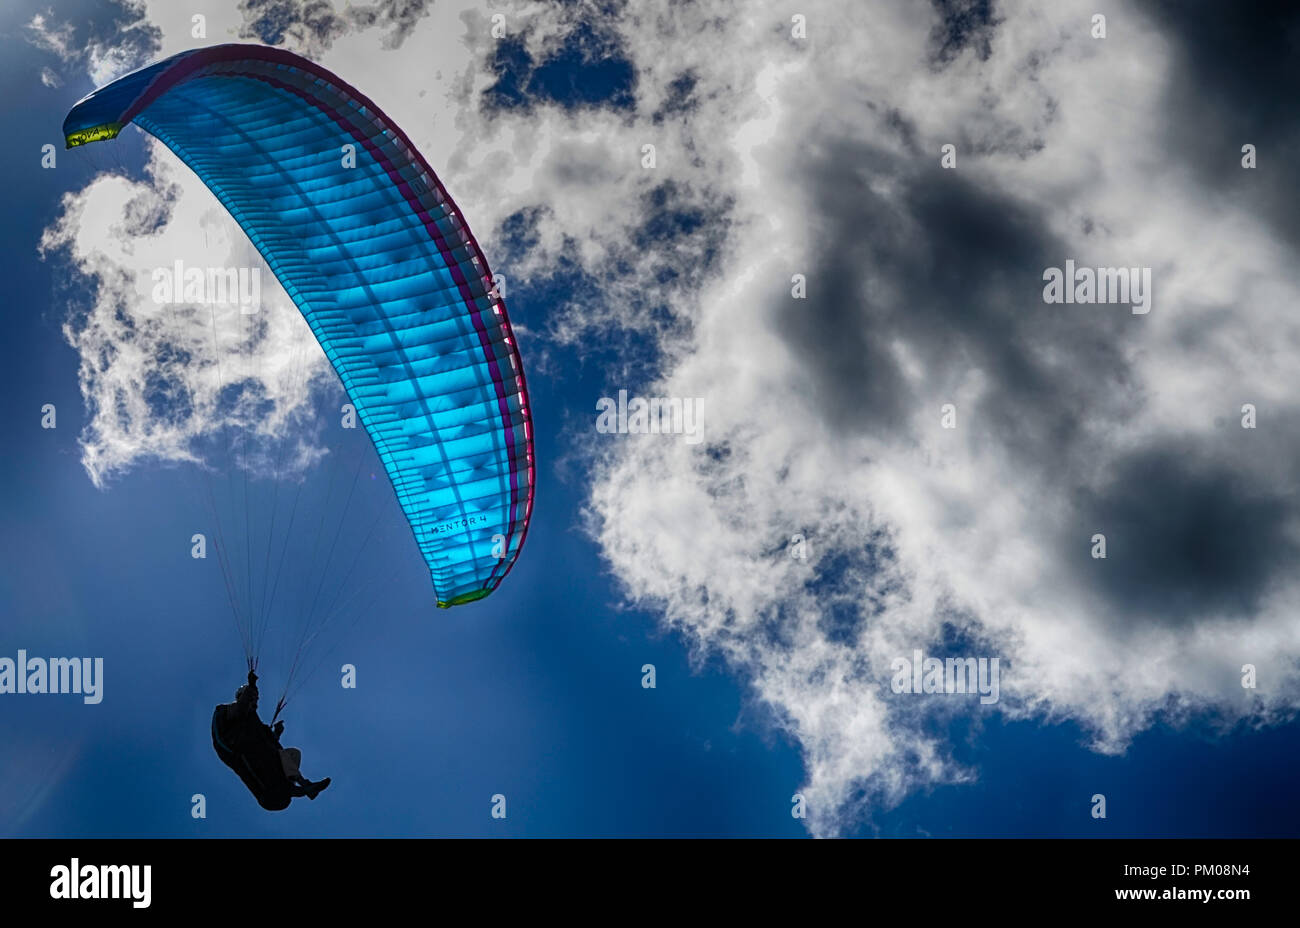 Hang Glider in the clouds, Gloucestershire, England, United Kingdom Stock Photo